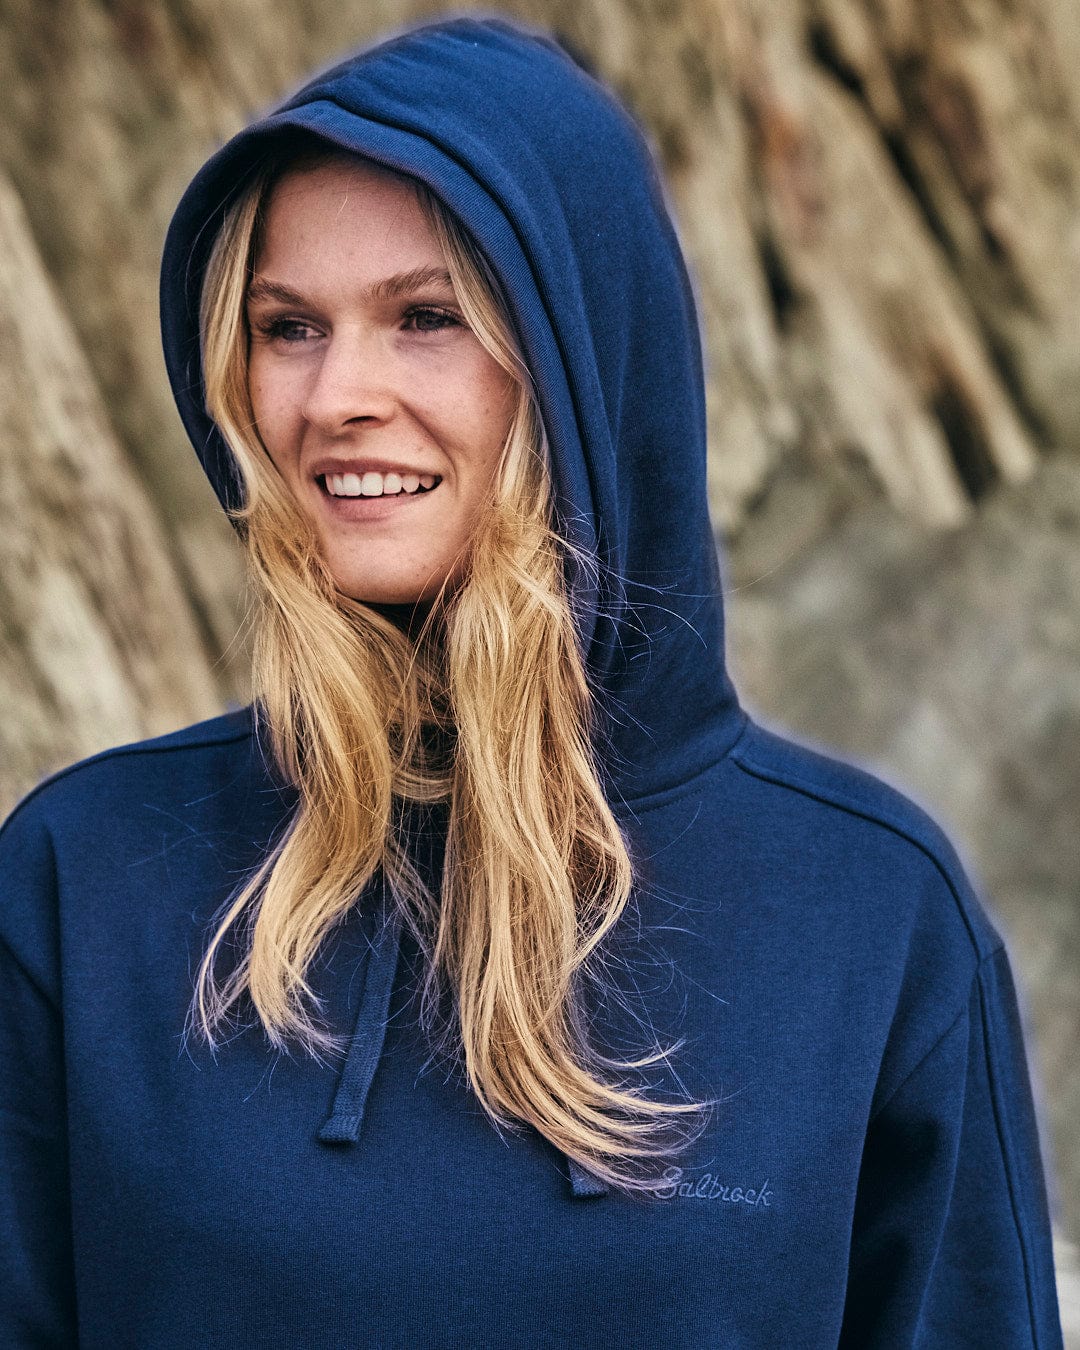 A woman stylishly dons a Saltrock Elsa - Womens Hooded Sweat Dress - Dark Blue, combining comfort and style effortlessly.